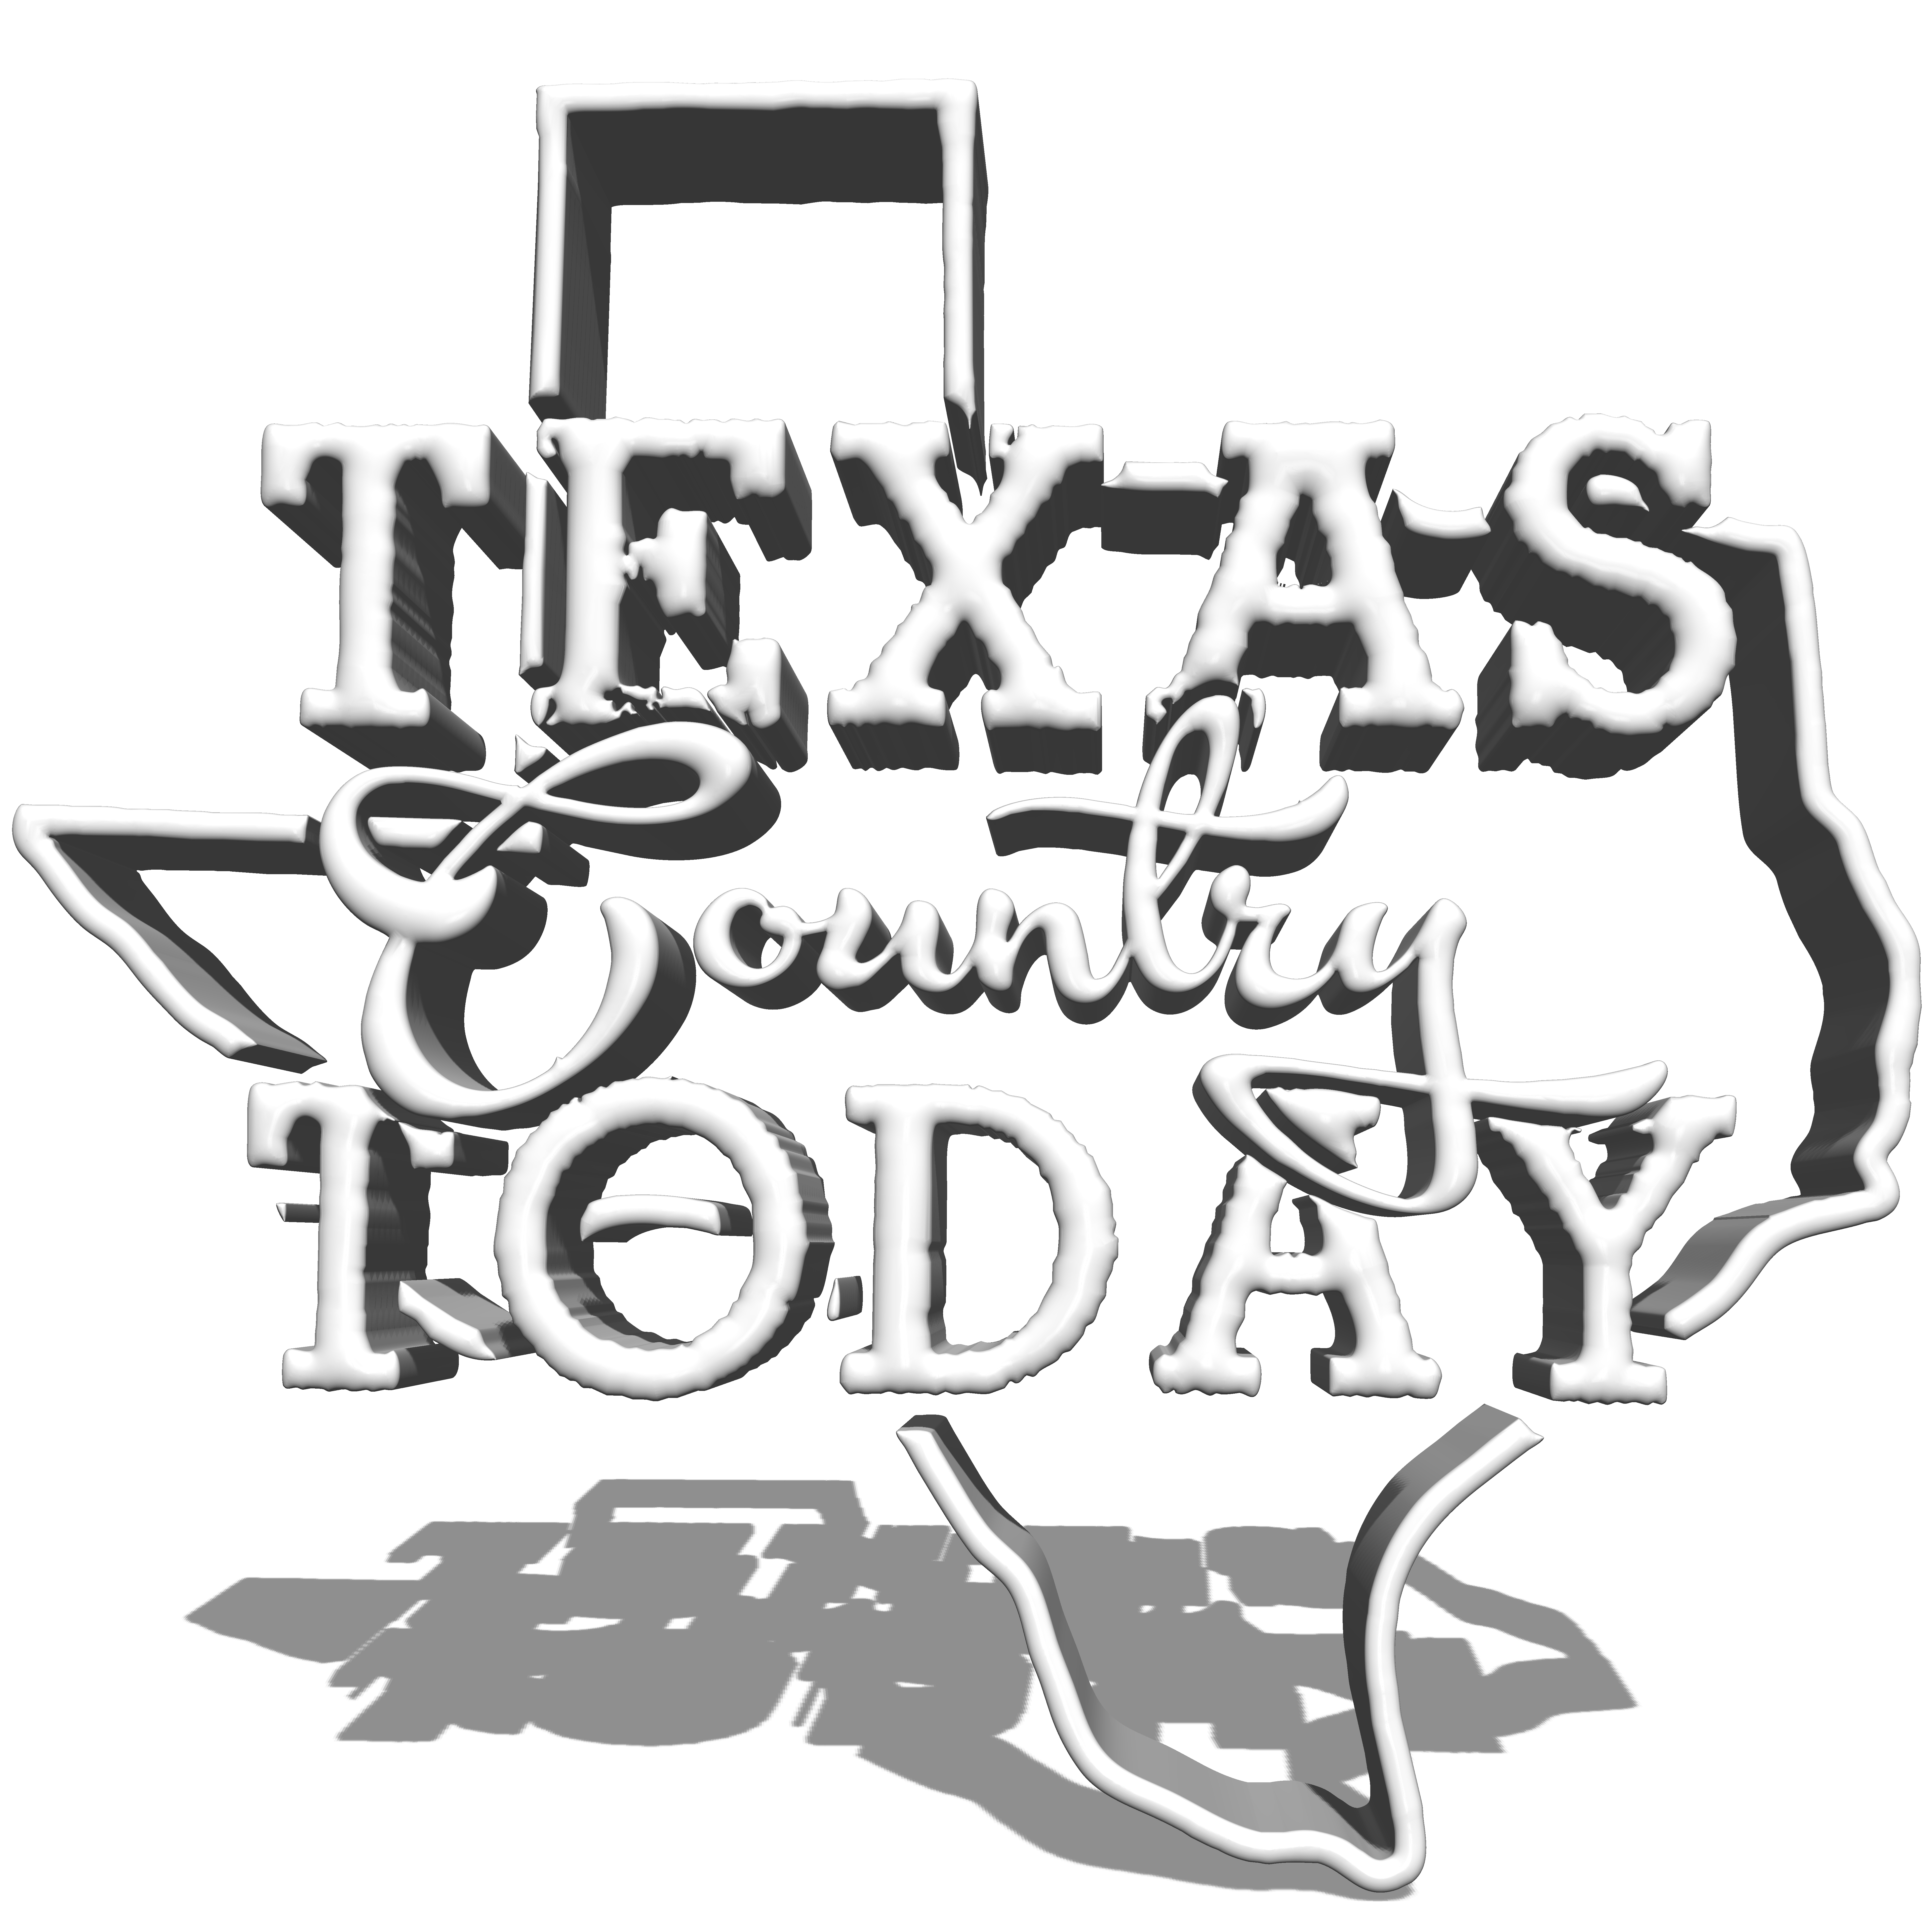 Art for Texas Country Today Radio by Plays All The Texas Country Hits